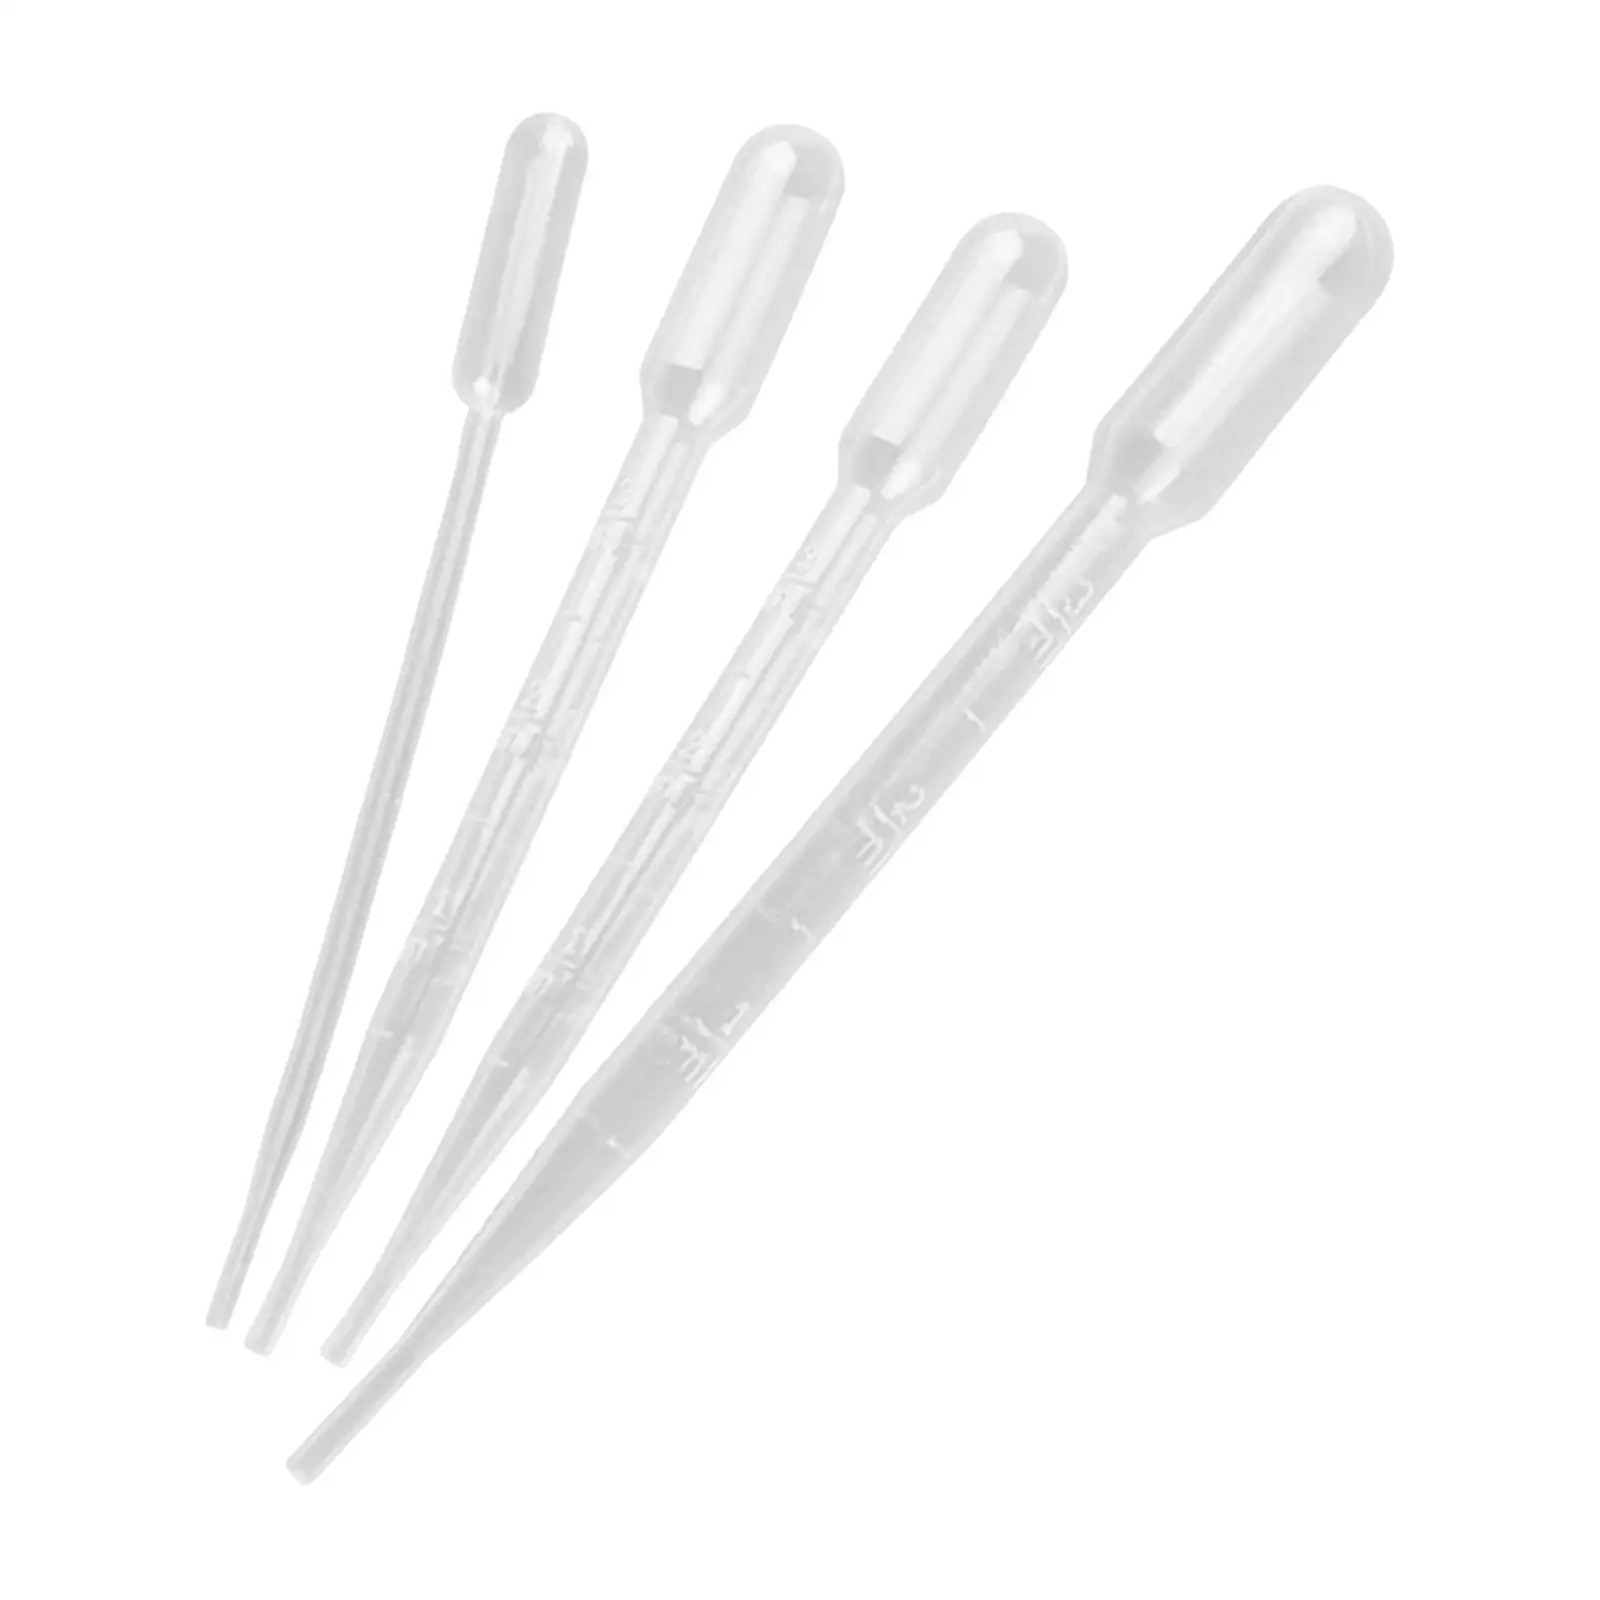 4x Transfer Graduated Pipettes Modeling Painting Tool Clear Liquid Dropper Dropper Set for Hobby Building Tools Toys Coloring